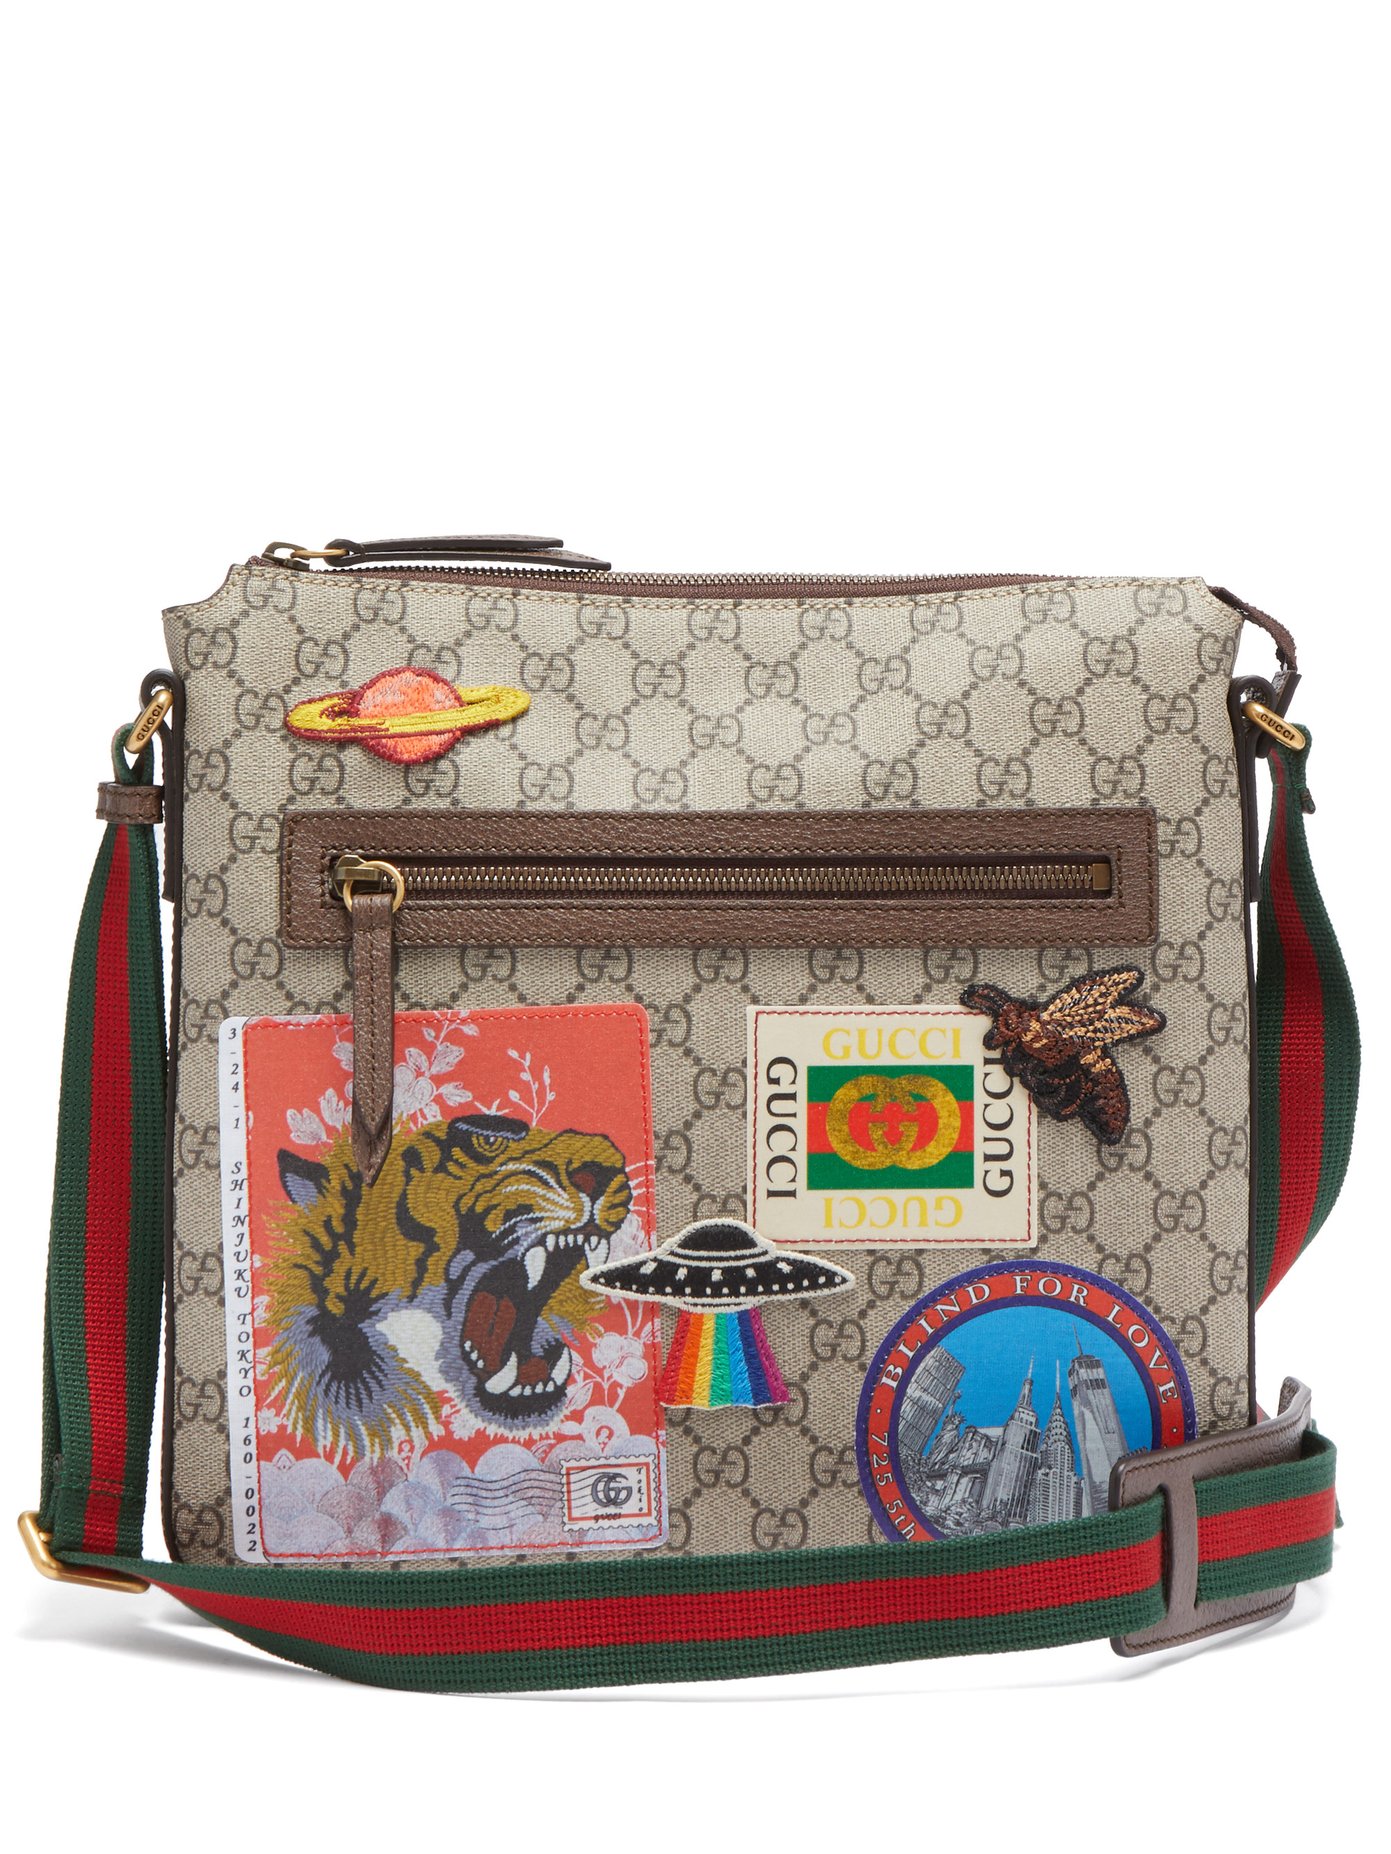 Gucci Courrier Messenger Bag Factory Sale, UP TO 53% |